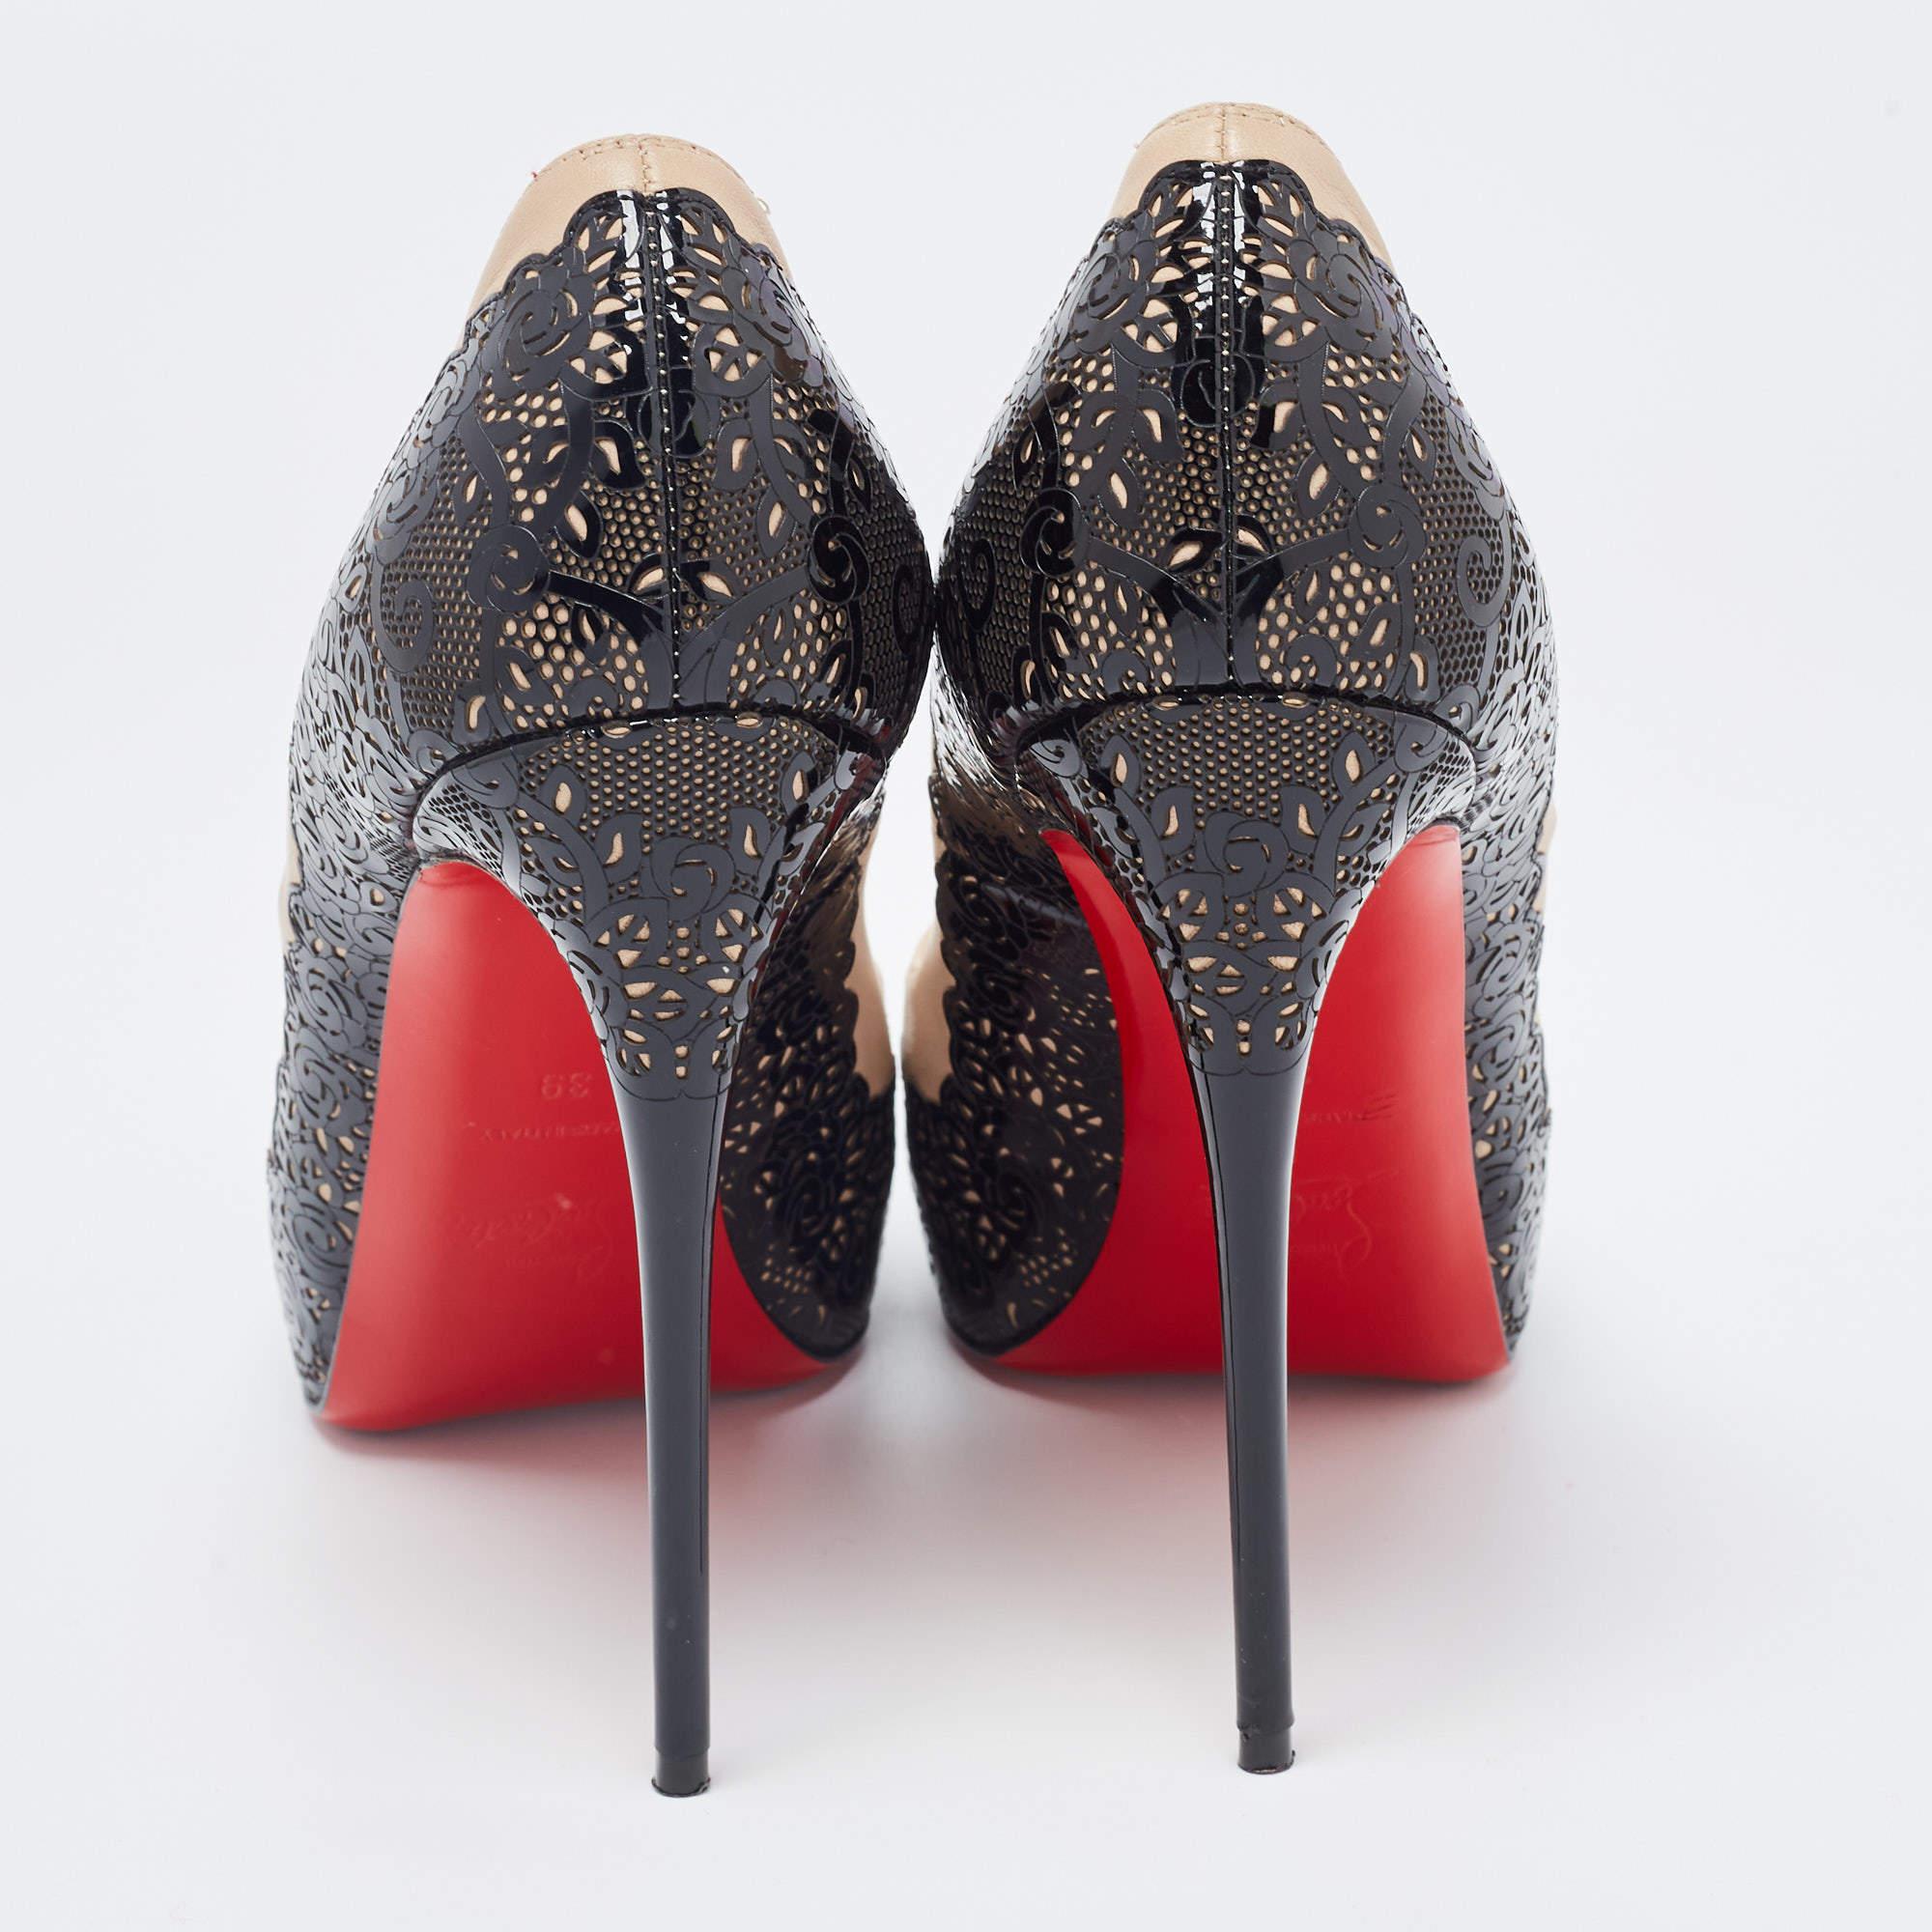 Black Christian Louboutin Laser Cut and Leather Veramucha Peep Toe Pumps Size 39 For Sale